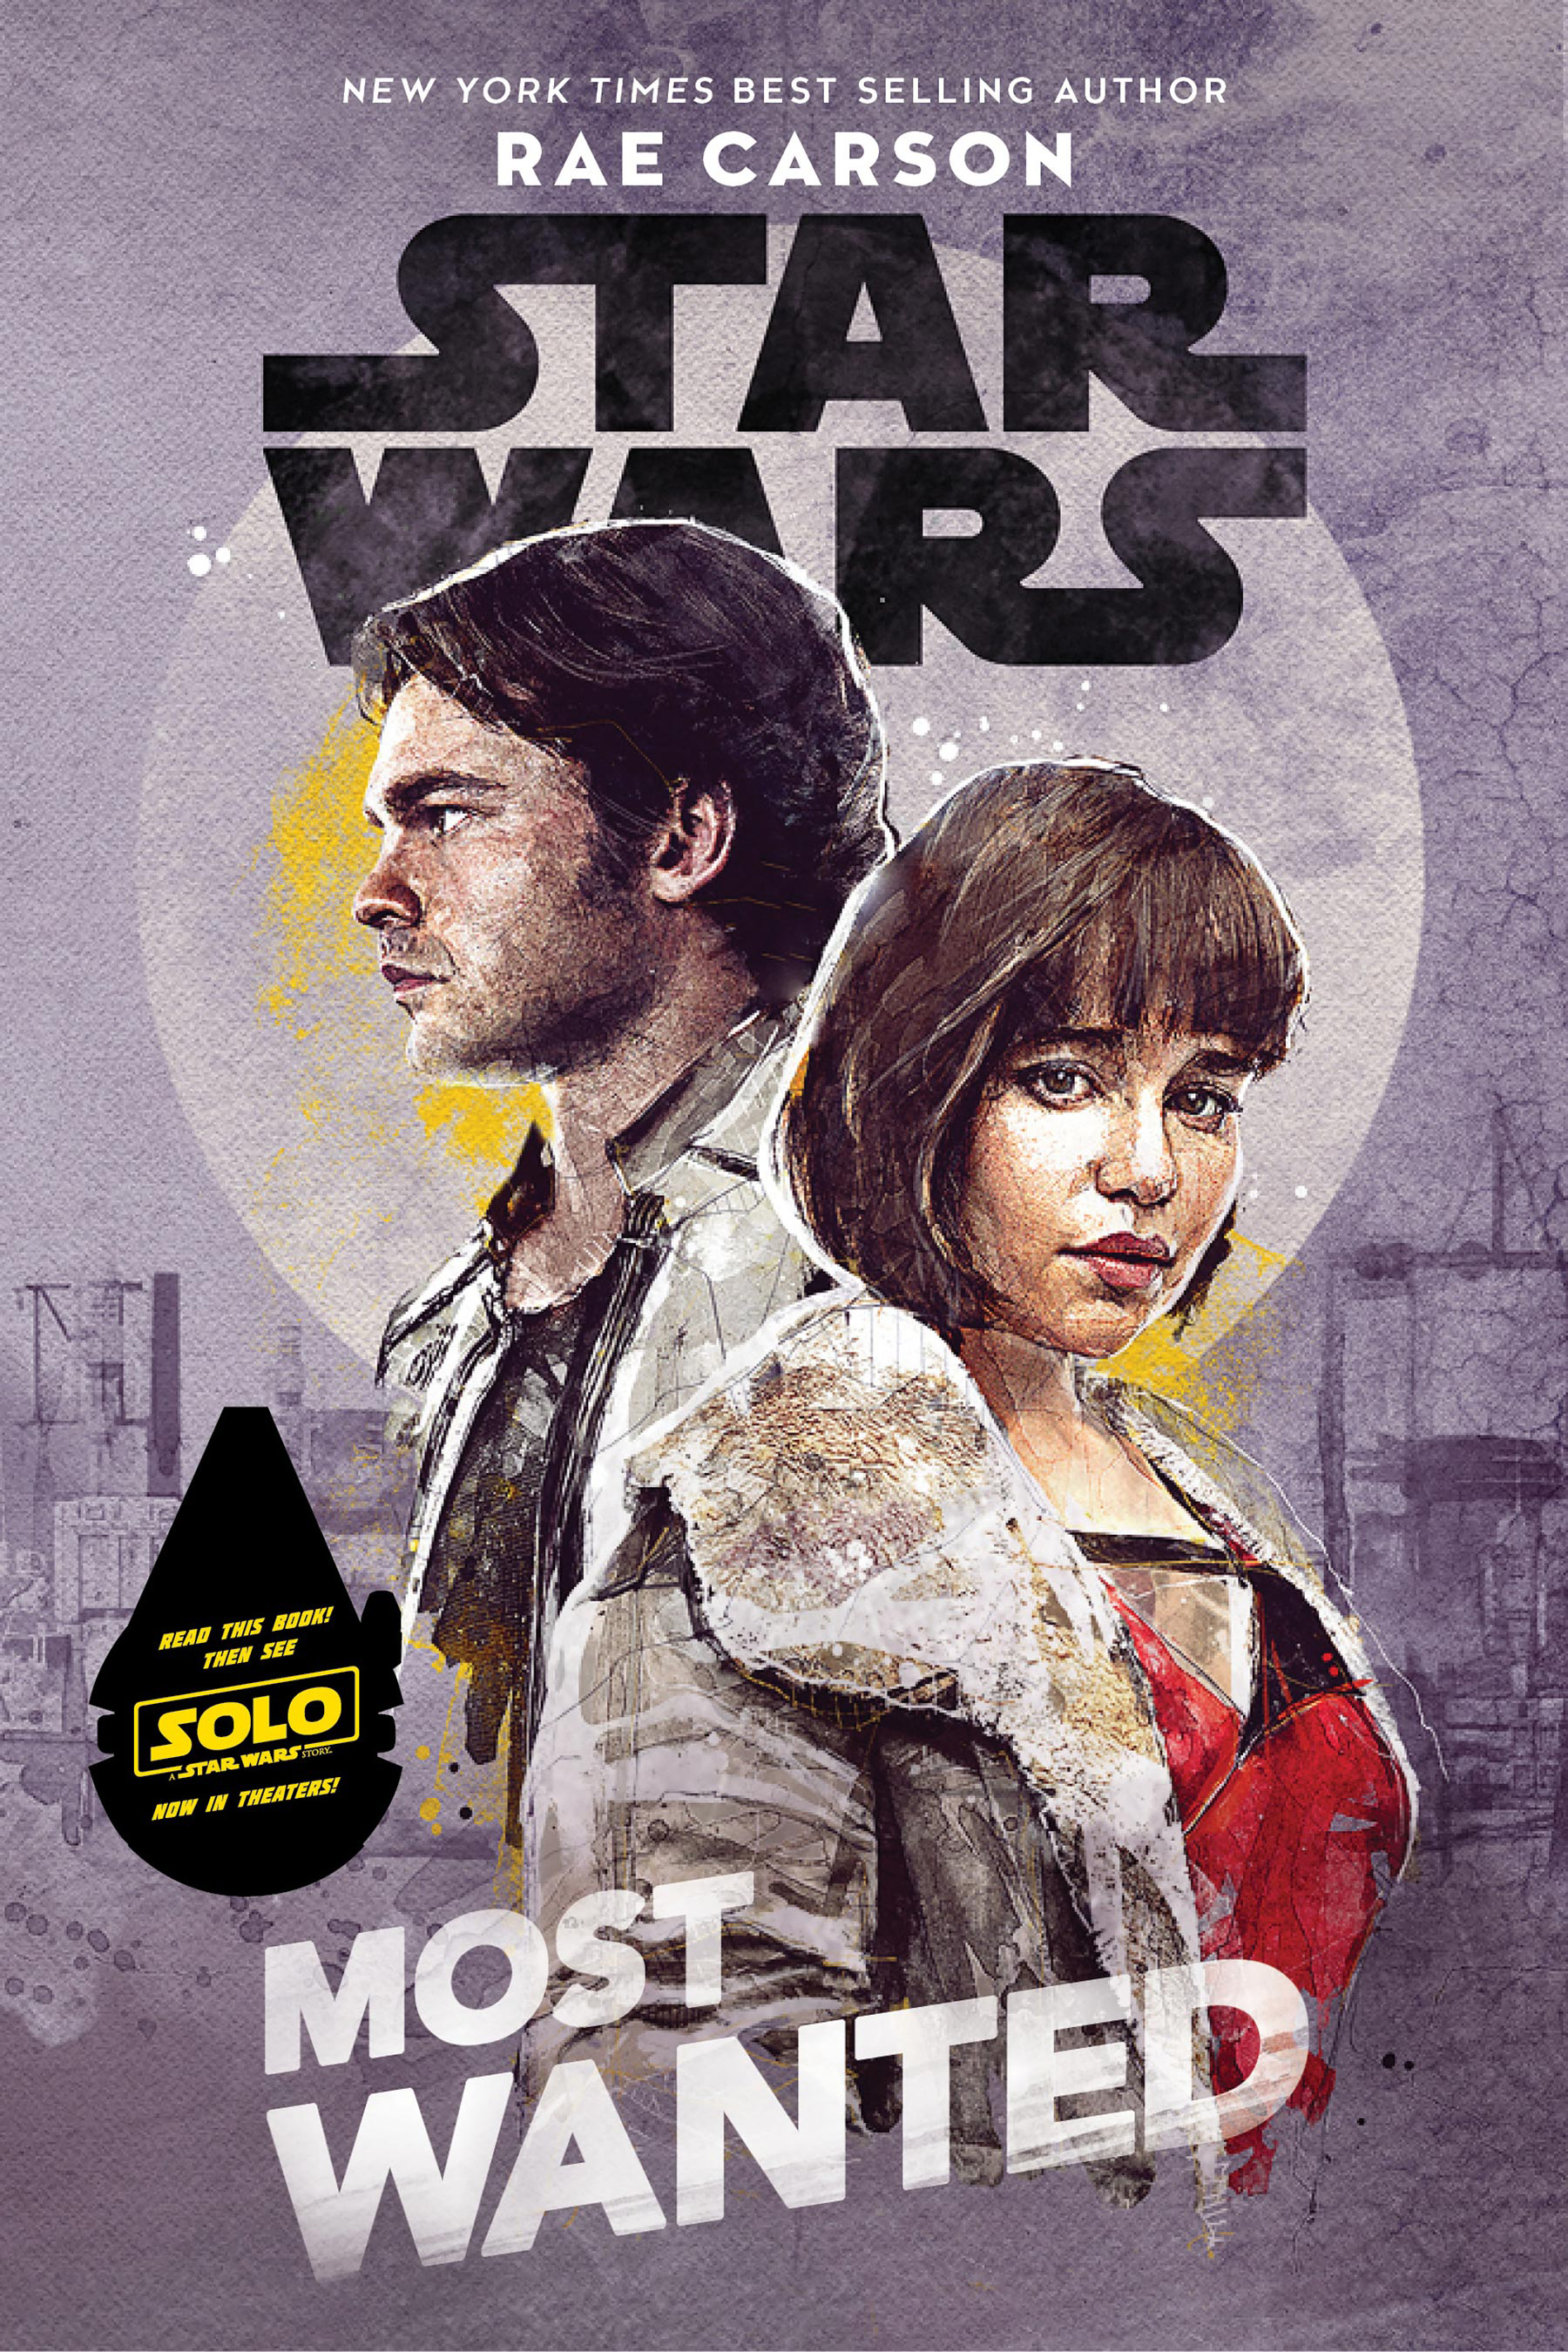 https://vignette.wikia.nocookie.net/starwars/images/6/60/Most_Wanted_book_cover.jpg/revision/latest?cb=20180217015536